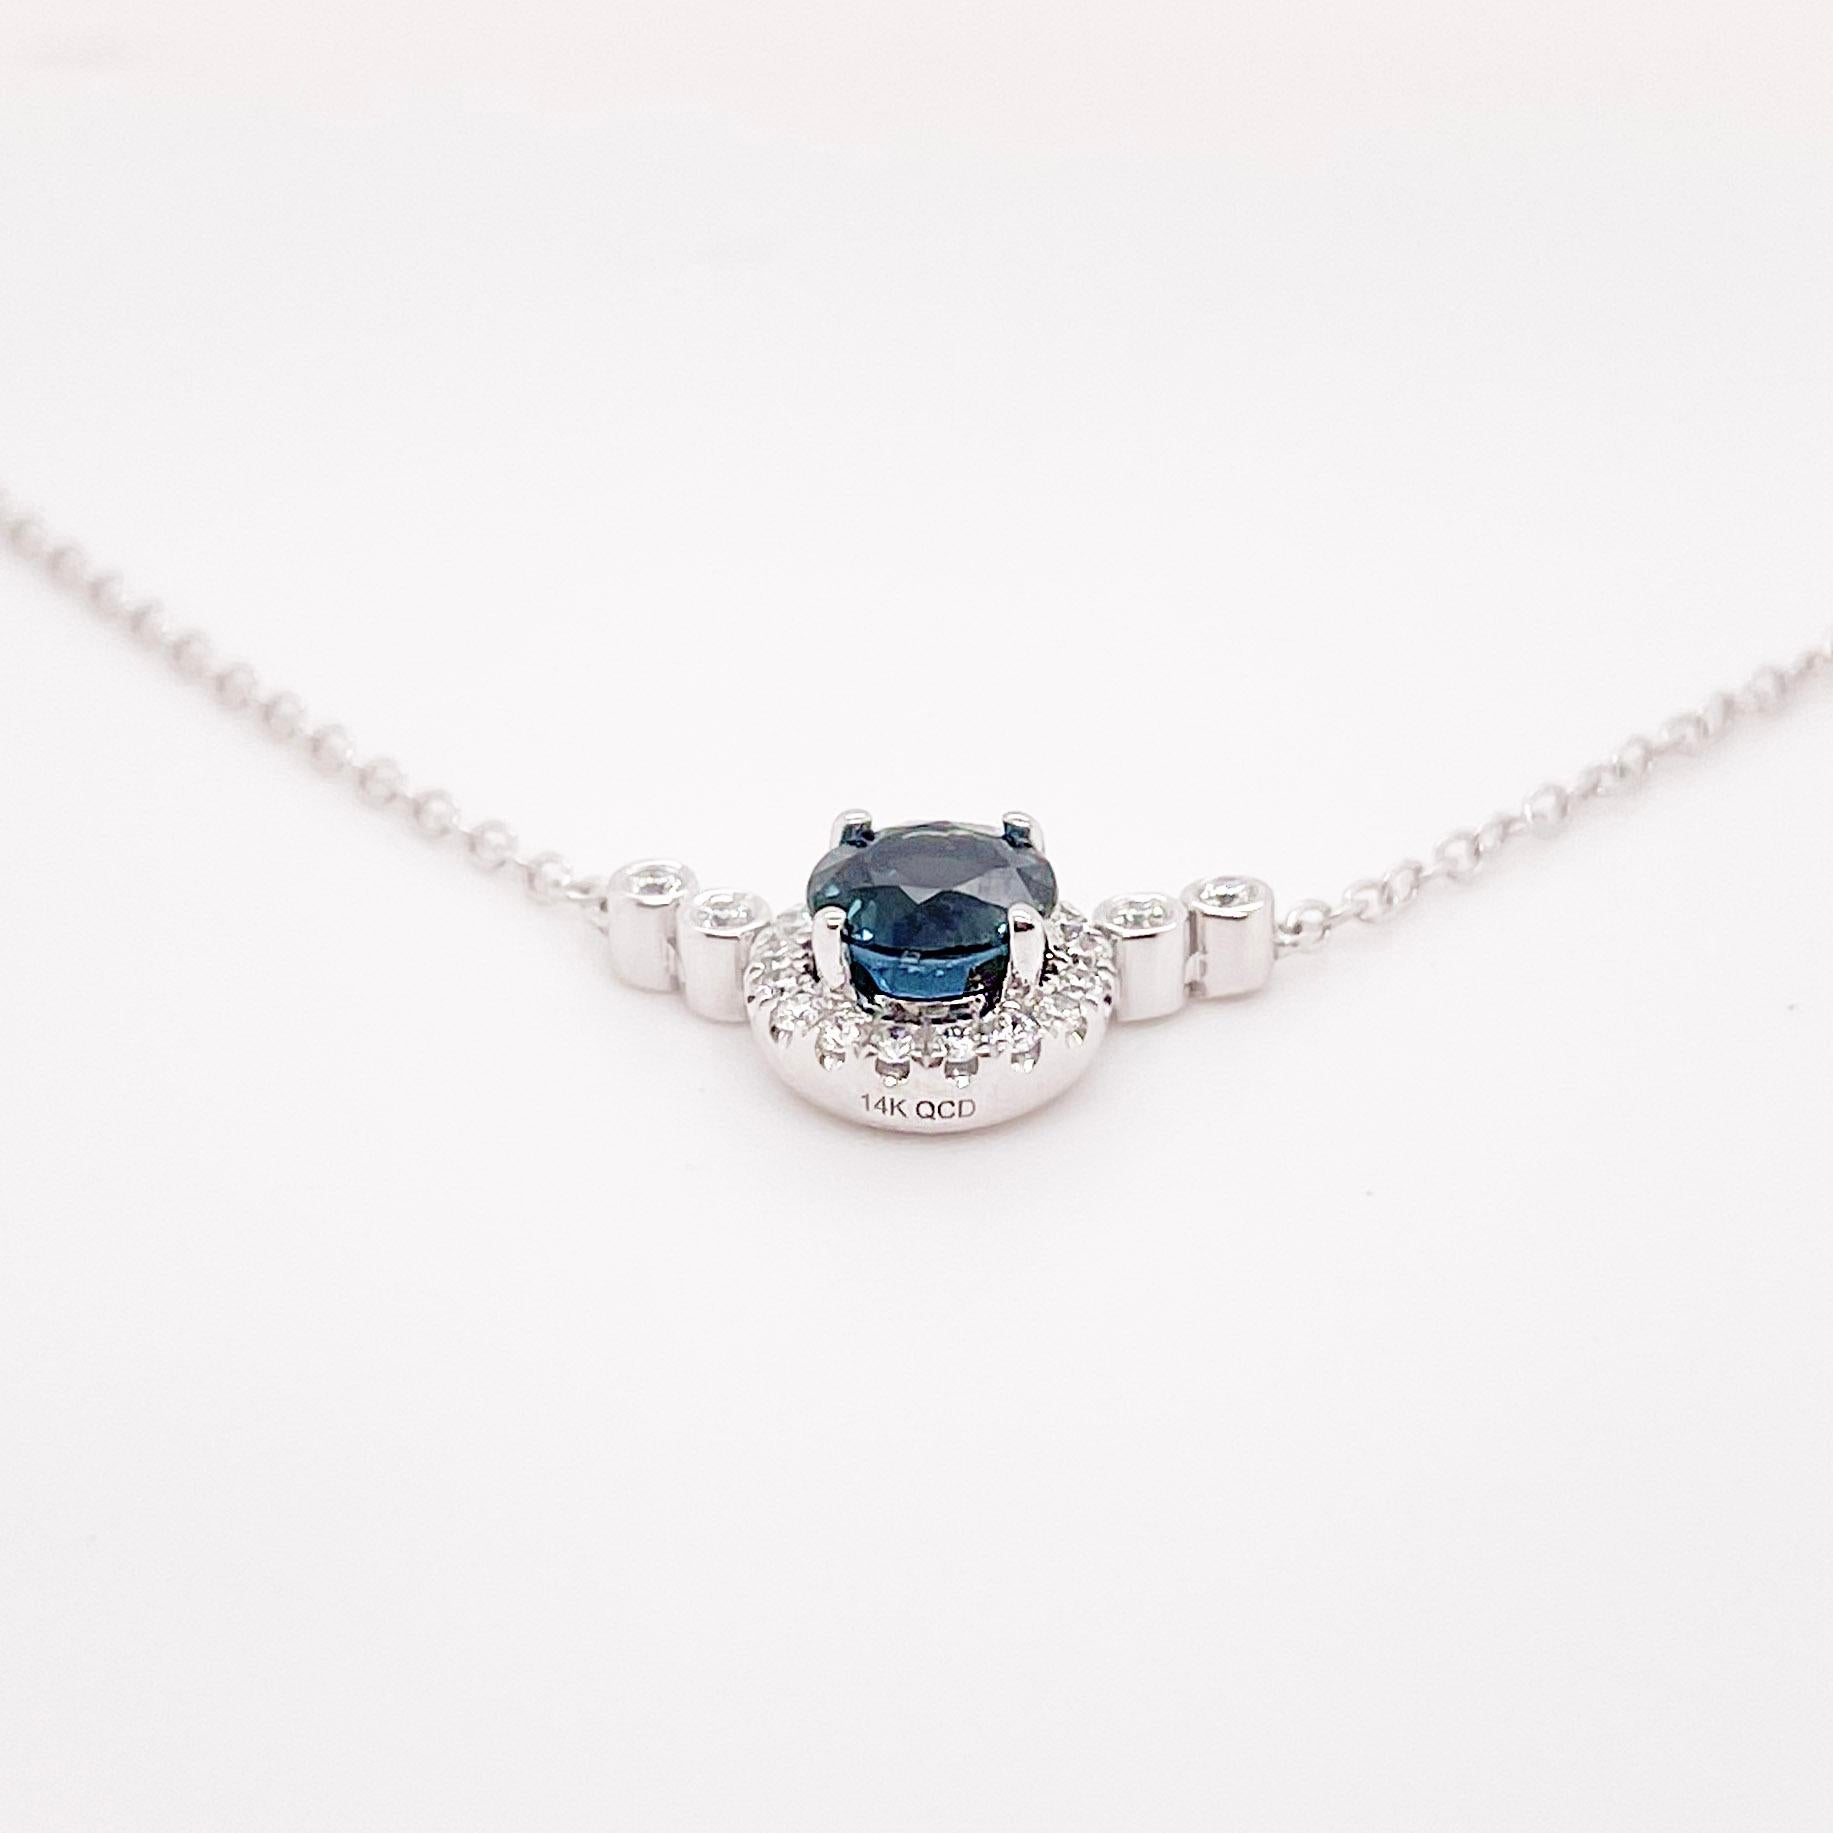 This simple sapphire and diamond necklace can go perfectly with a neck stack or on its own because of its delicate design. The contrast of the white diamond with the deep blue sapphire would catch anyone's eye. The details for this beautiful